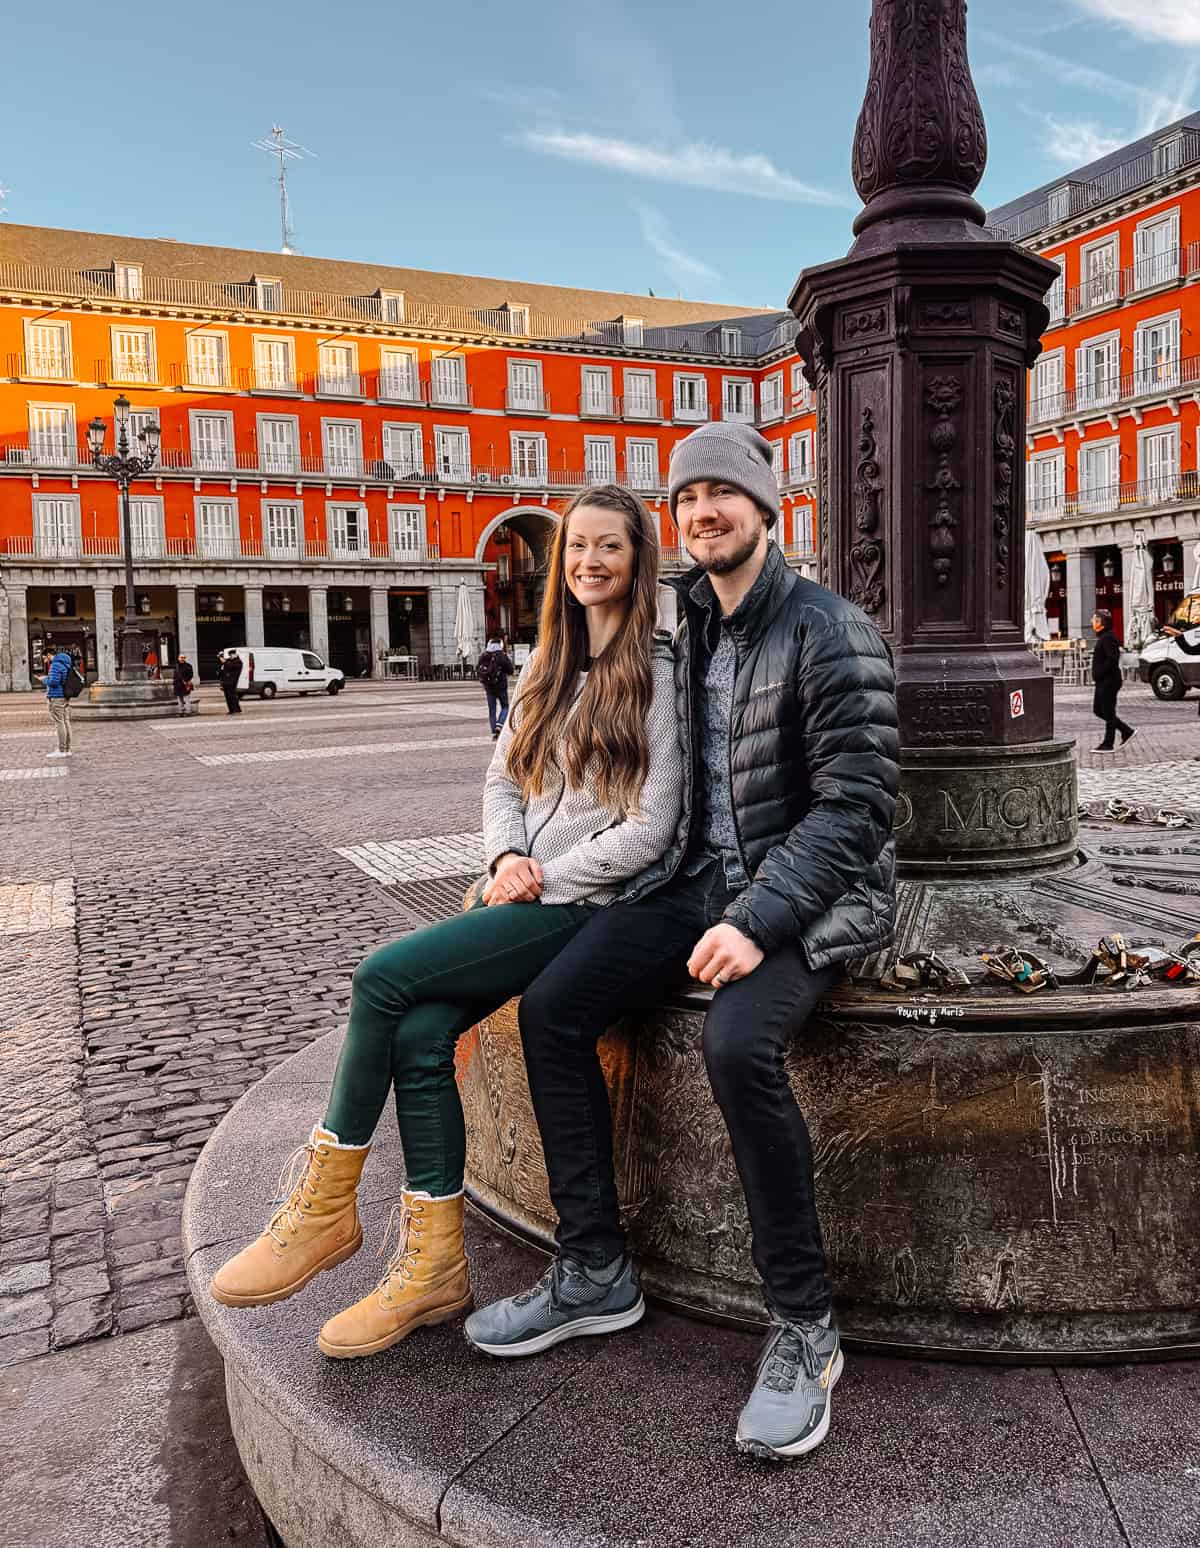 A joyful couple sitting on the edge of a fountain at Plaza Mayor in Madrid, the iconic red façades of the surrounding buildings framing their relaxed, contented pose.